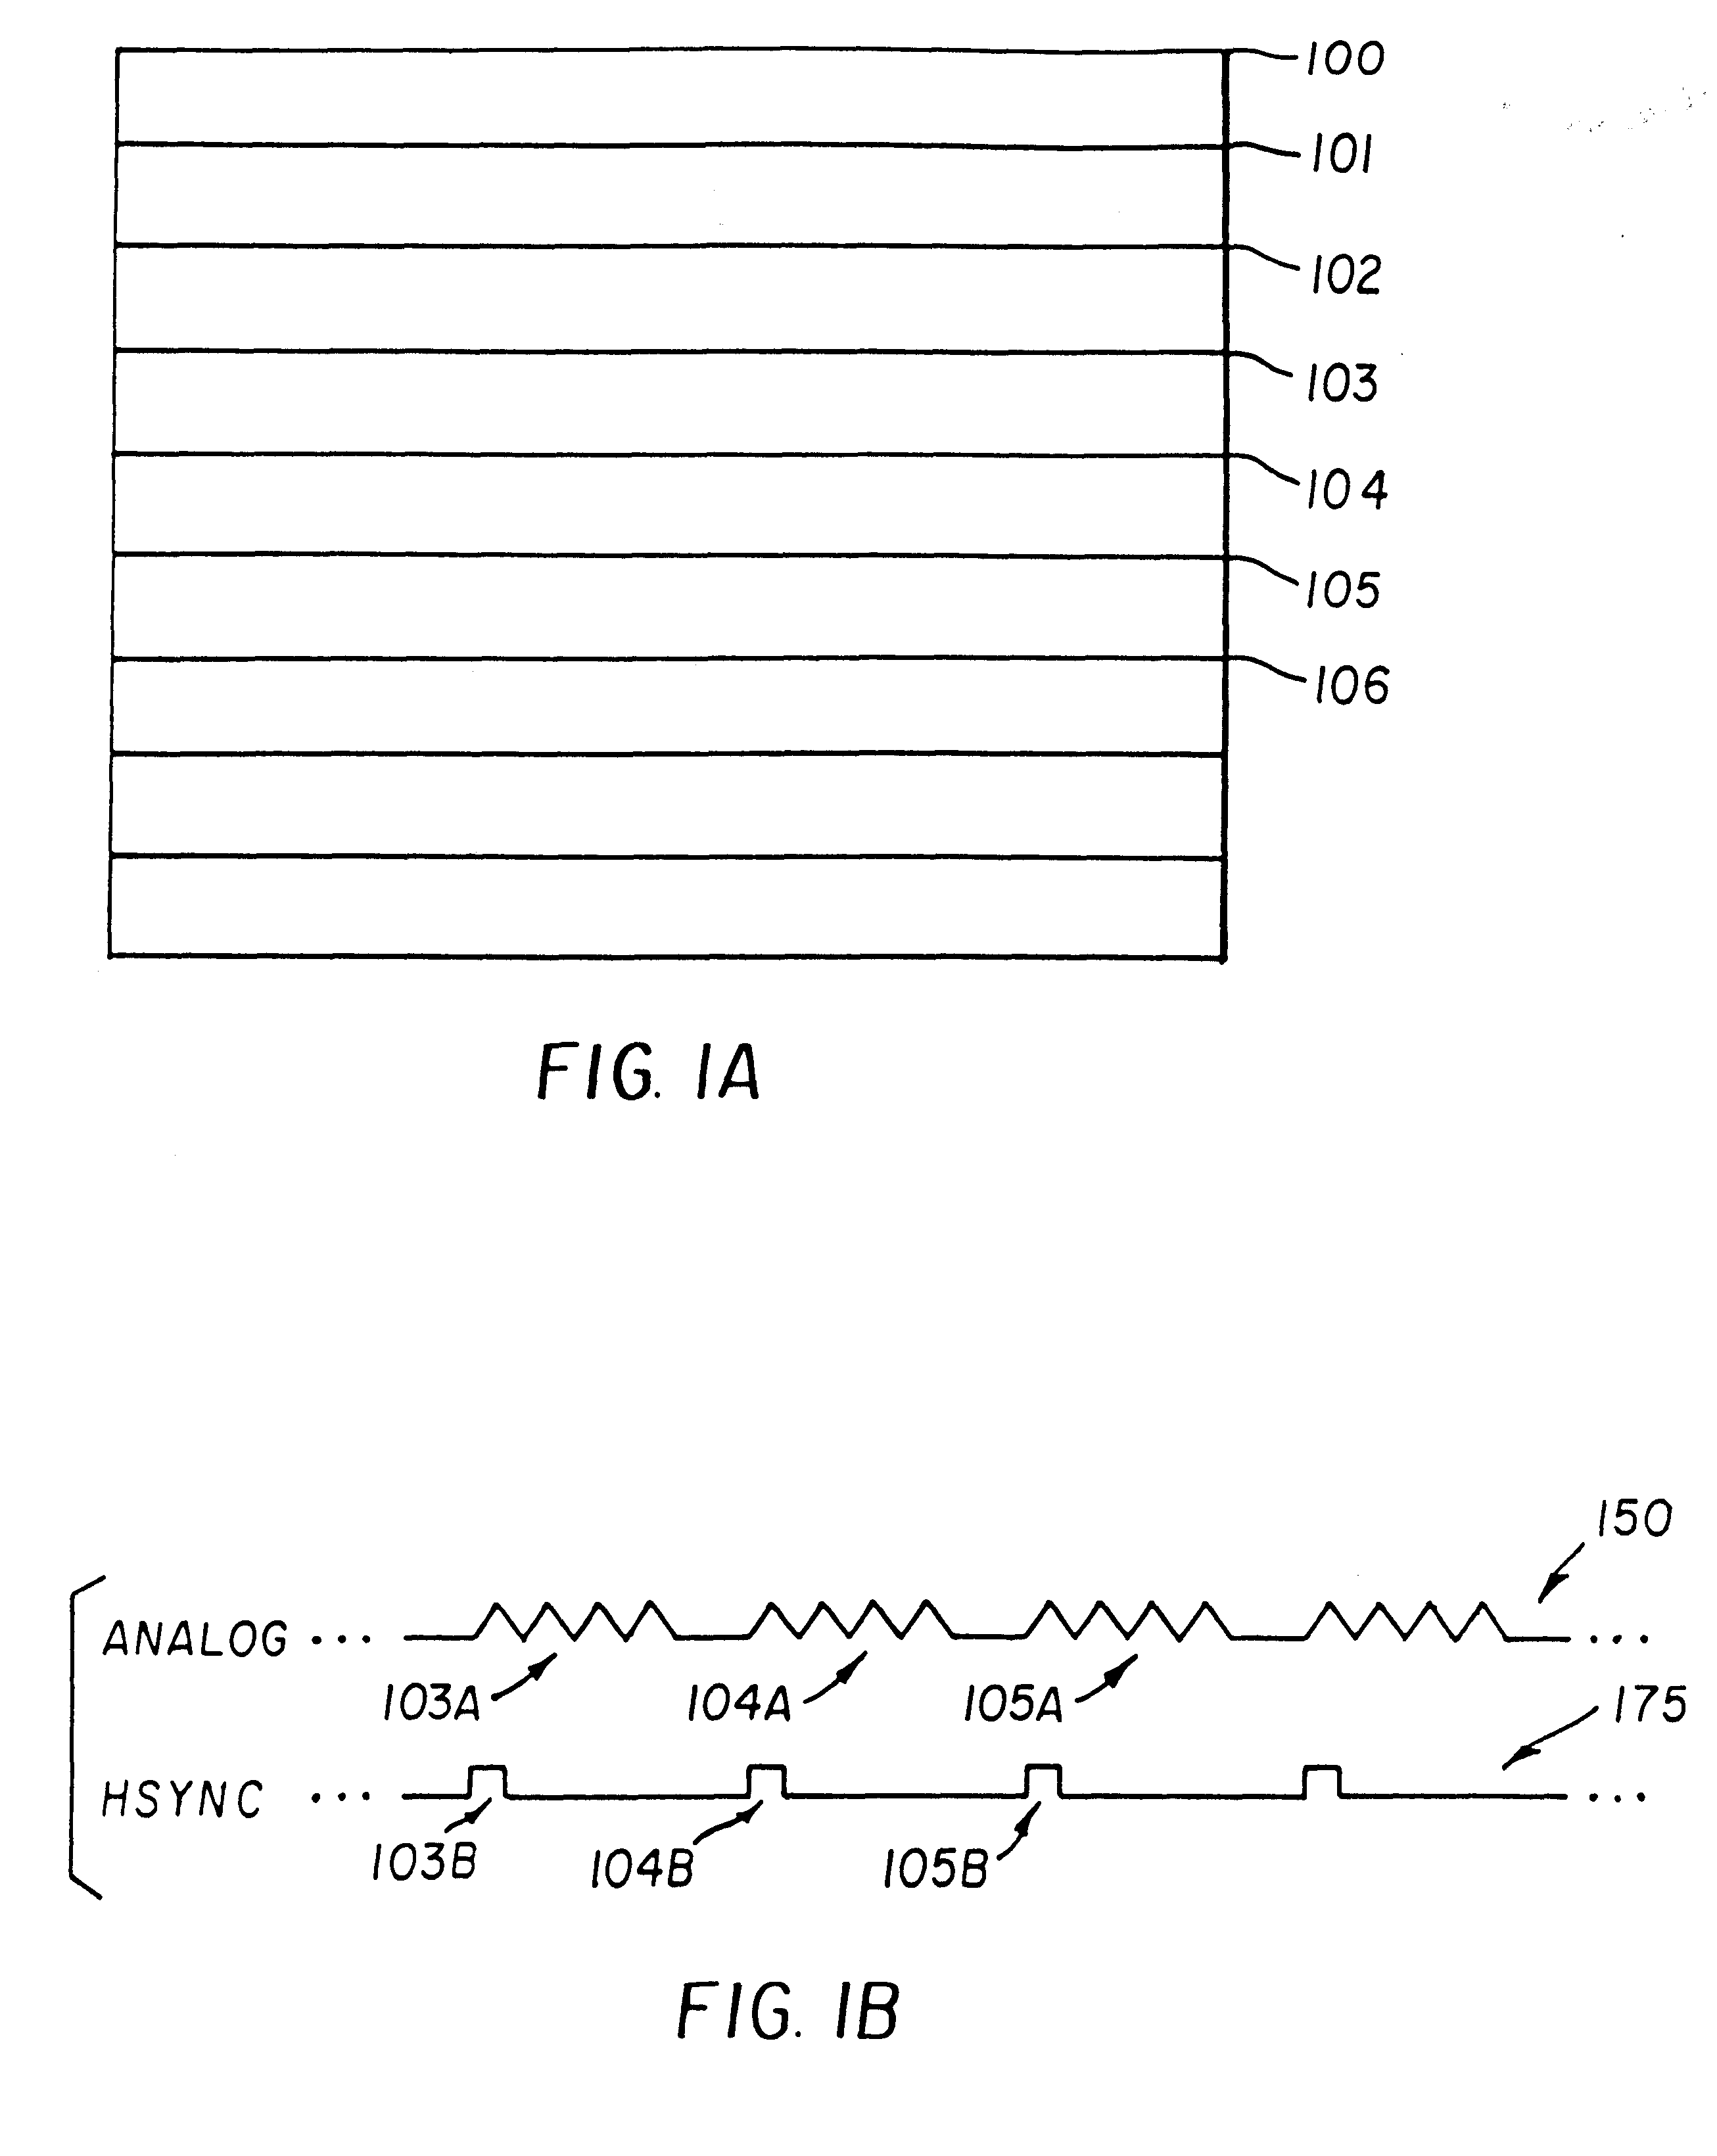 Circuit and method for generating pixel data elements from analog image data and associated synchronization signals